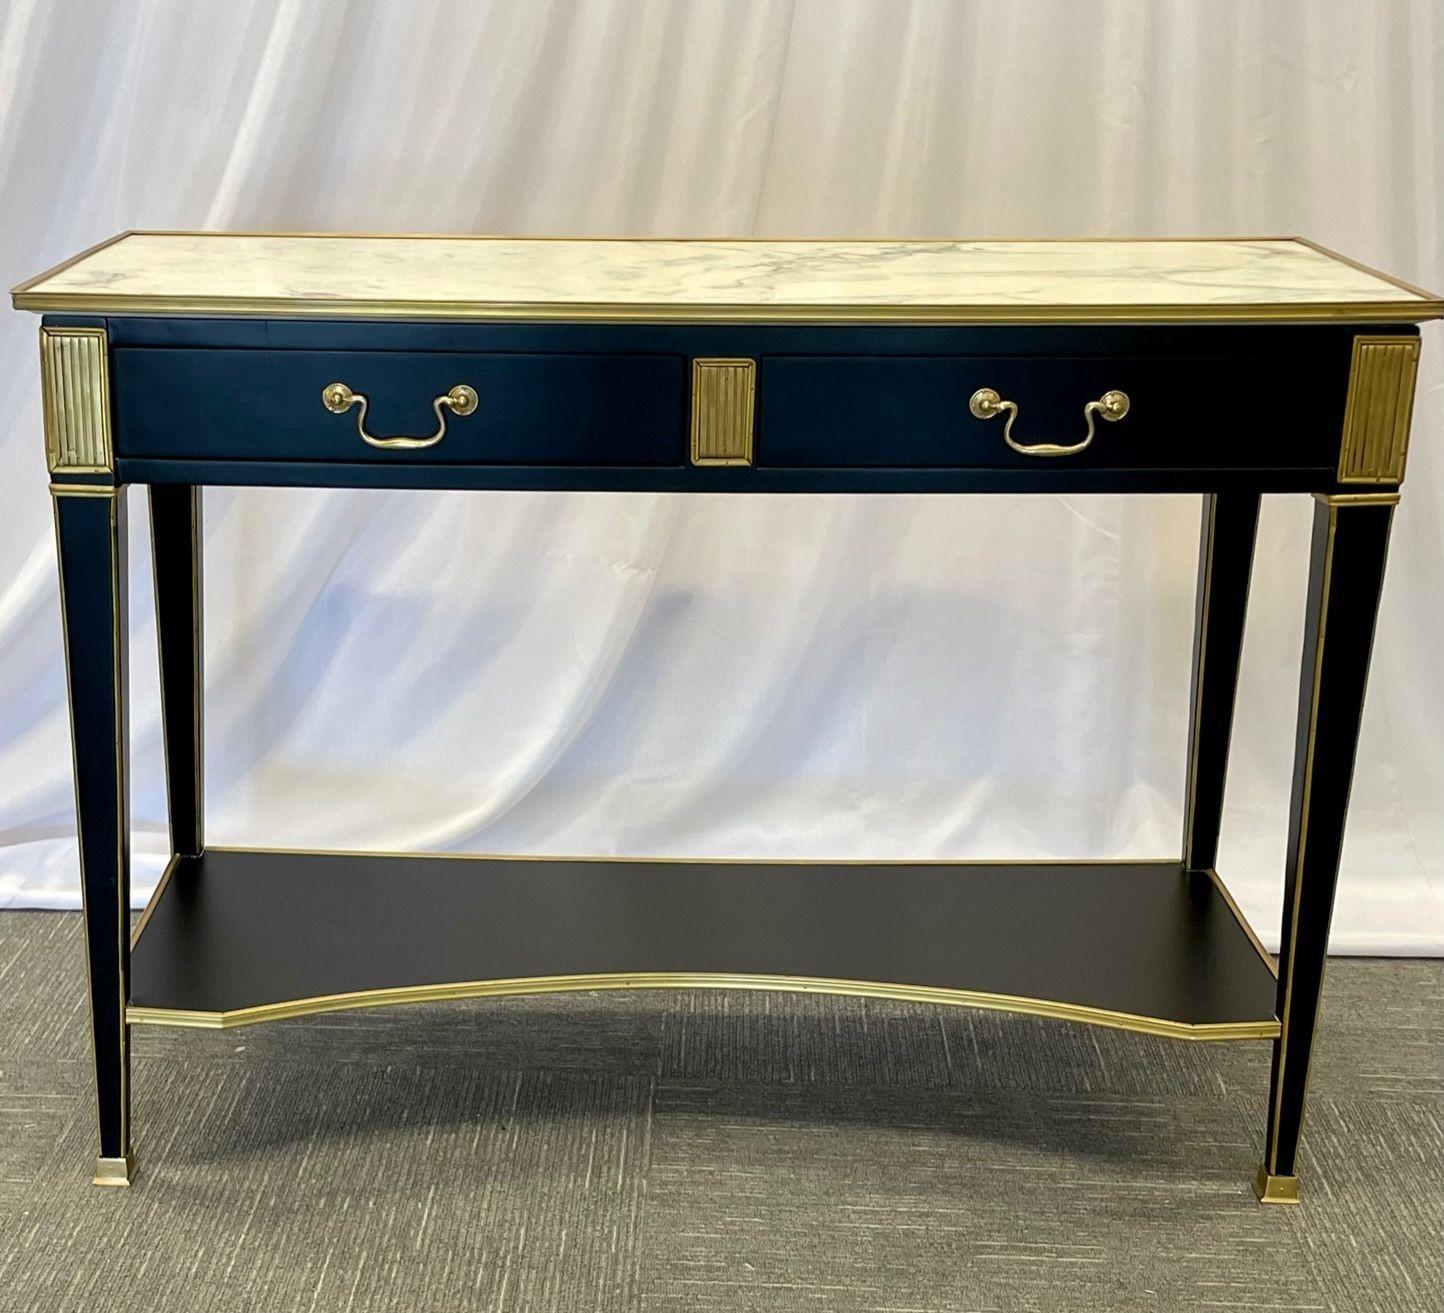 Pair of Hollywood Regency Neoclassical Ebony Console or sofa tables, Manner of Maison Jansen
 
Pair of Hollywood Regency neoclassical ebony console or sofa tables in the manner of Maison Jansen. A stunning sleek and stylish pair of console tables